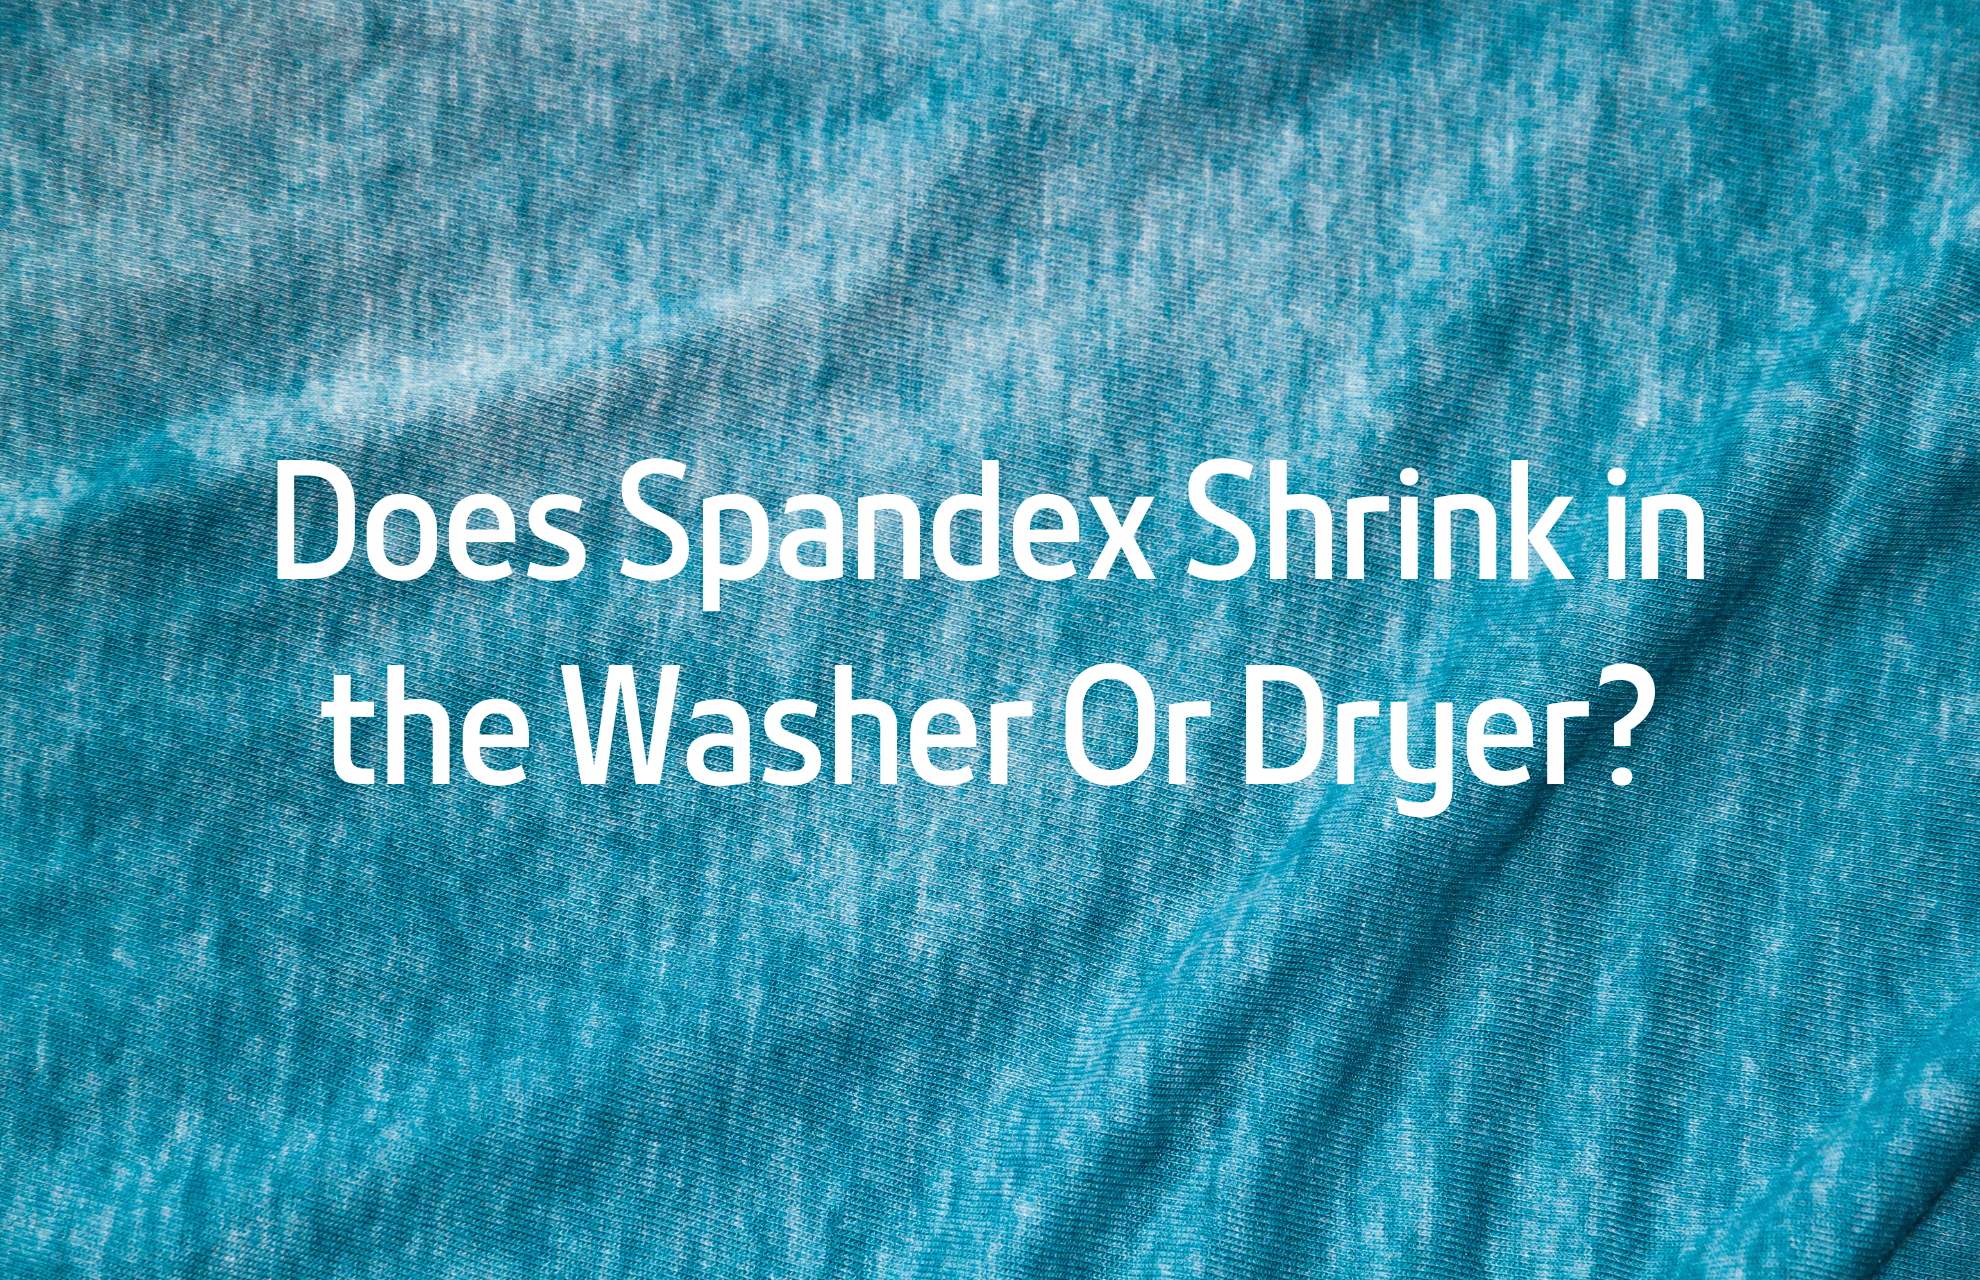 Does Spandex Shrink in the Washer Or Dryer?